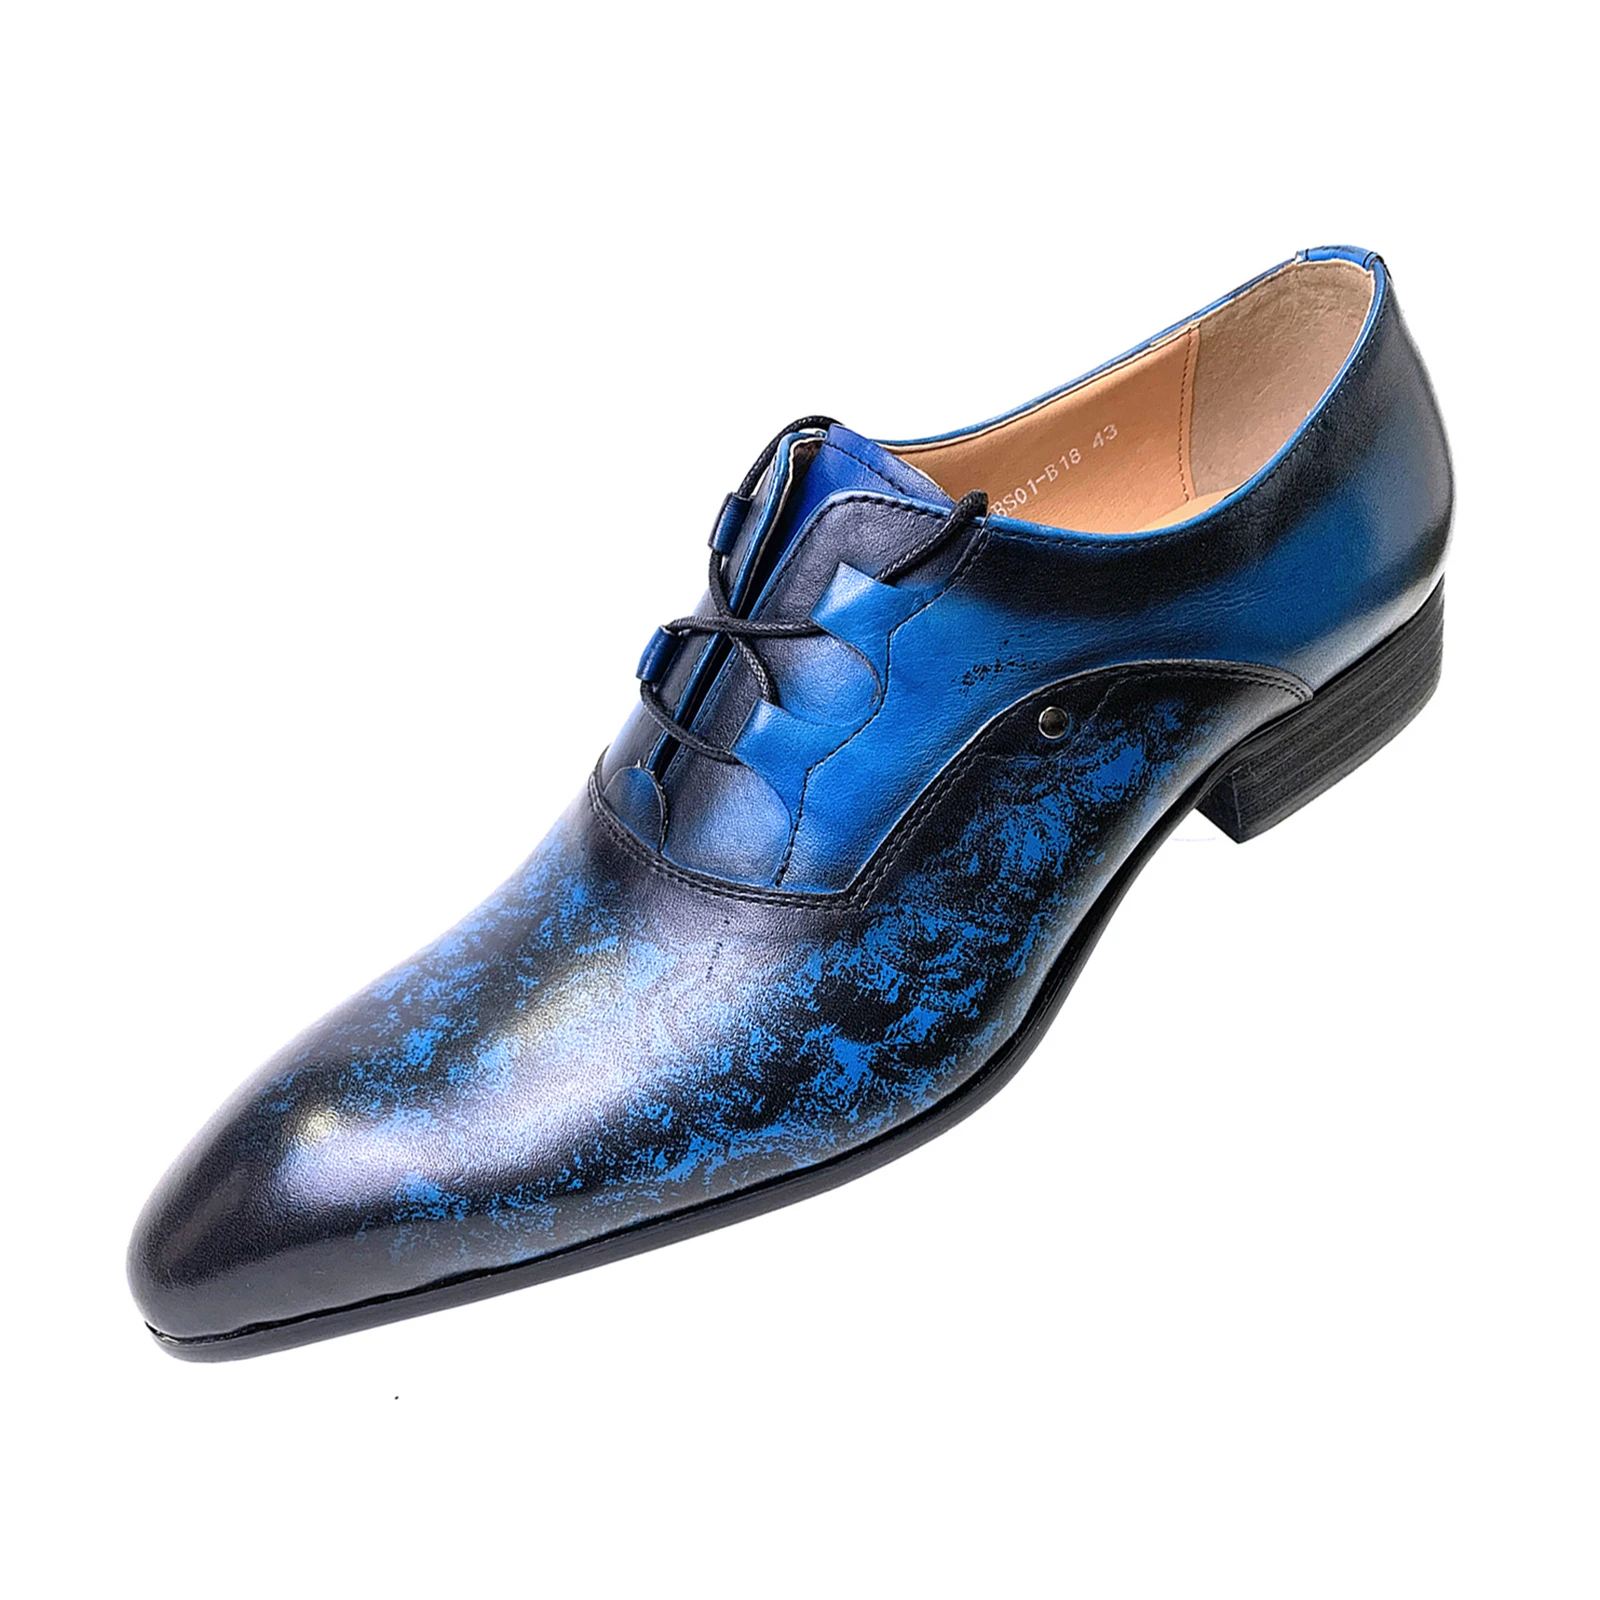 Luxury Italian Hand-Painted Mens Oxford Shoes Fashion Print Genuine Leather Blue Lace-up Wedding Office Suit Men Dress Shoes